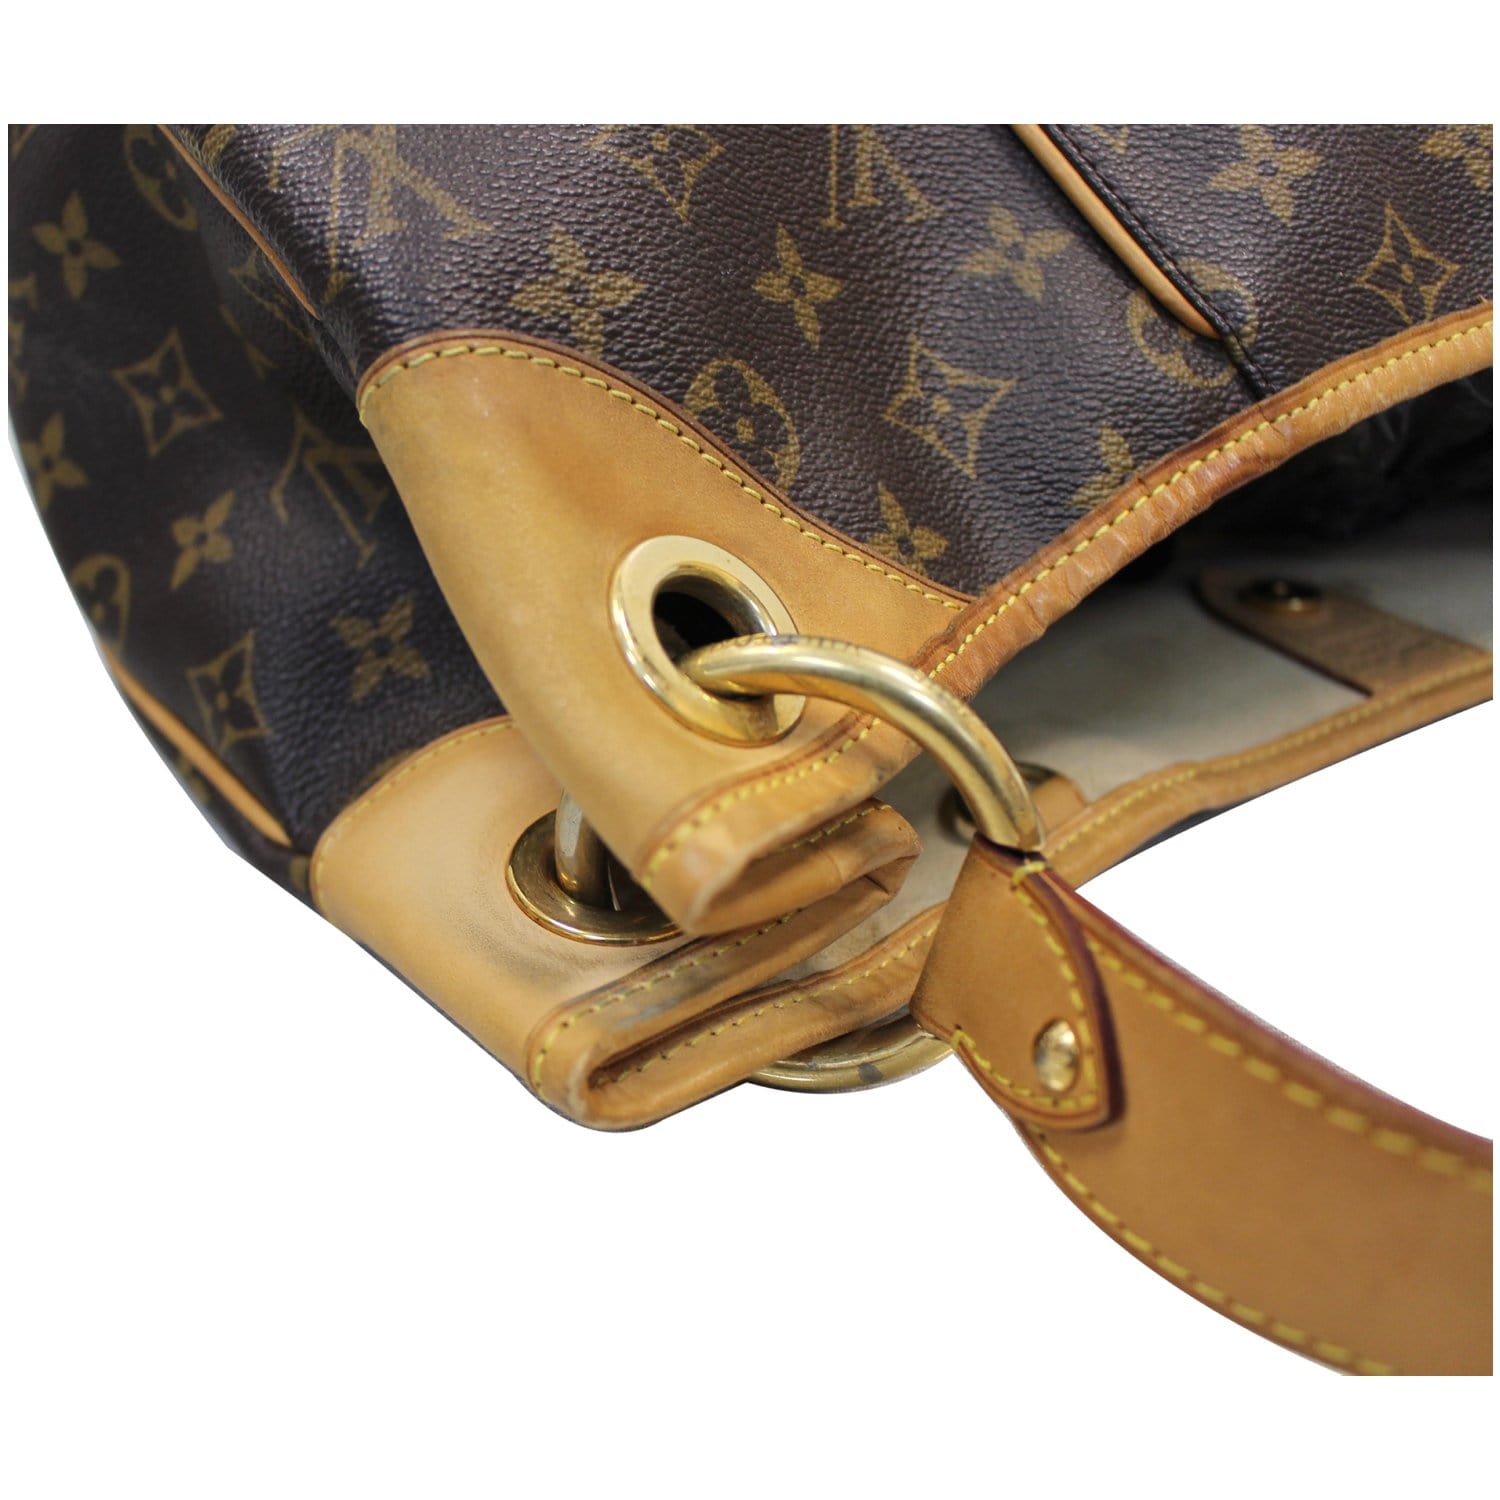 Louis Vuitton M95805 Limited Edition Canvas Riviera Cruise Galliera GM  (SP3098) - The Attic Place